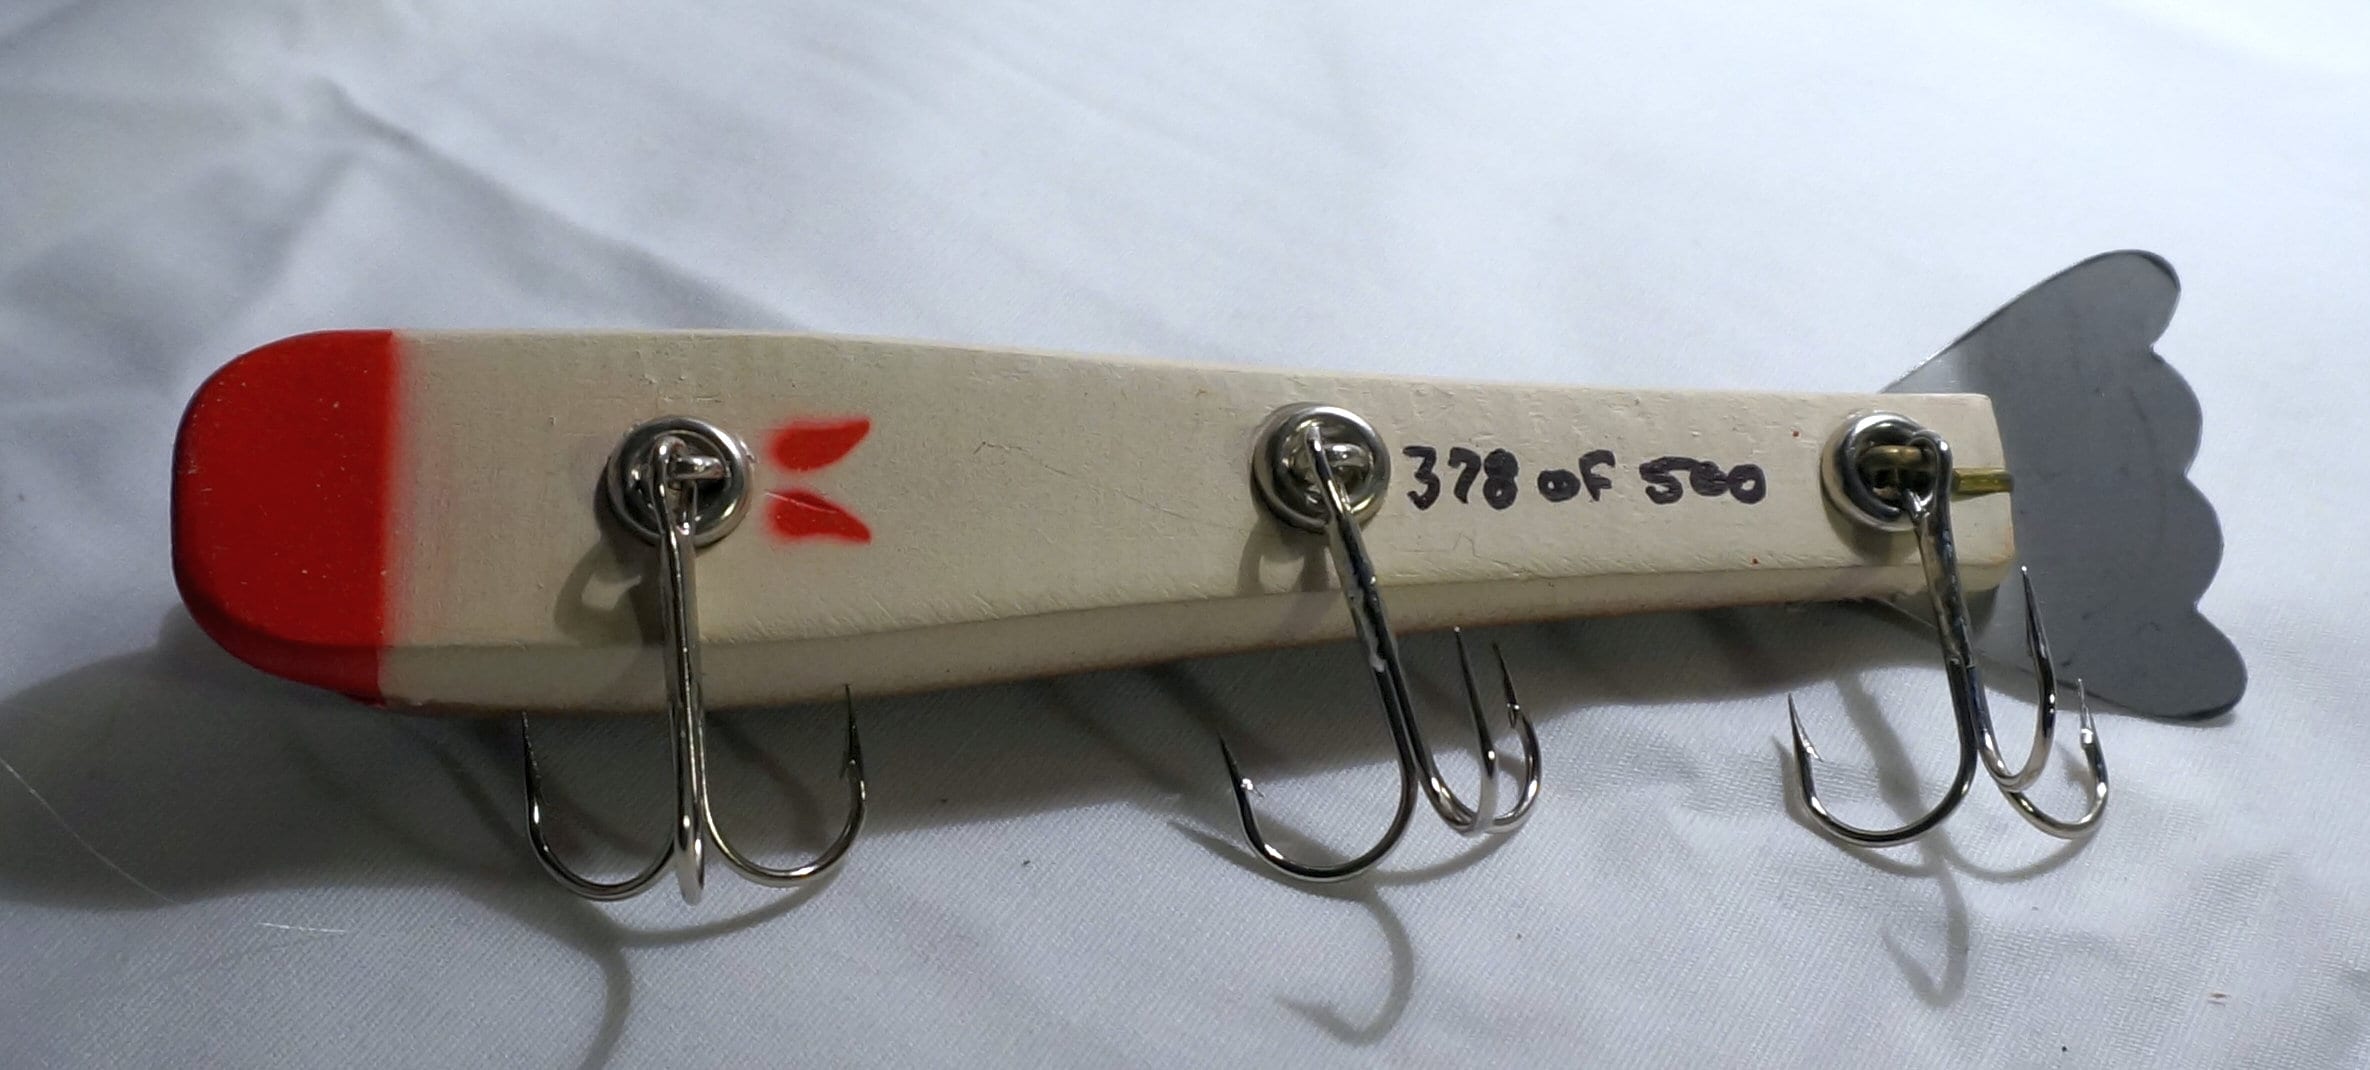 Vintage Hand-signed, Limited Bobbie Bait Musky Lure With Box 378/500 price  Reduced 